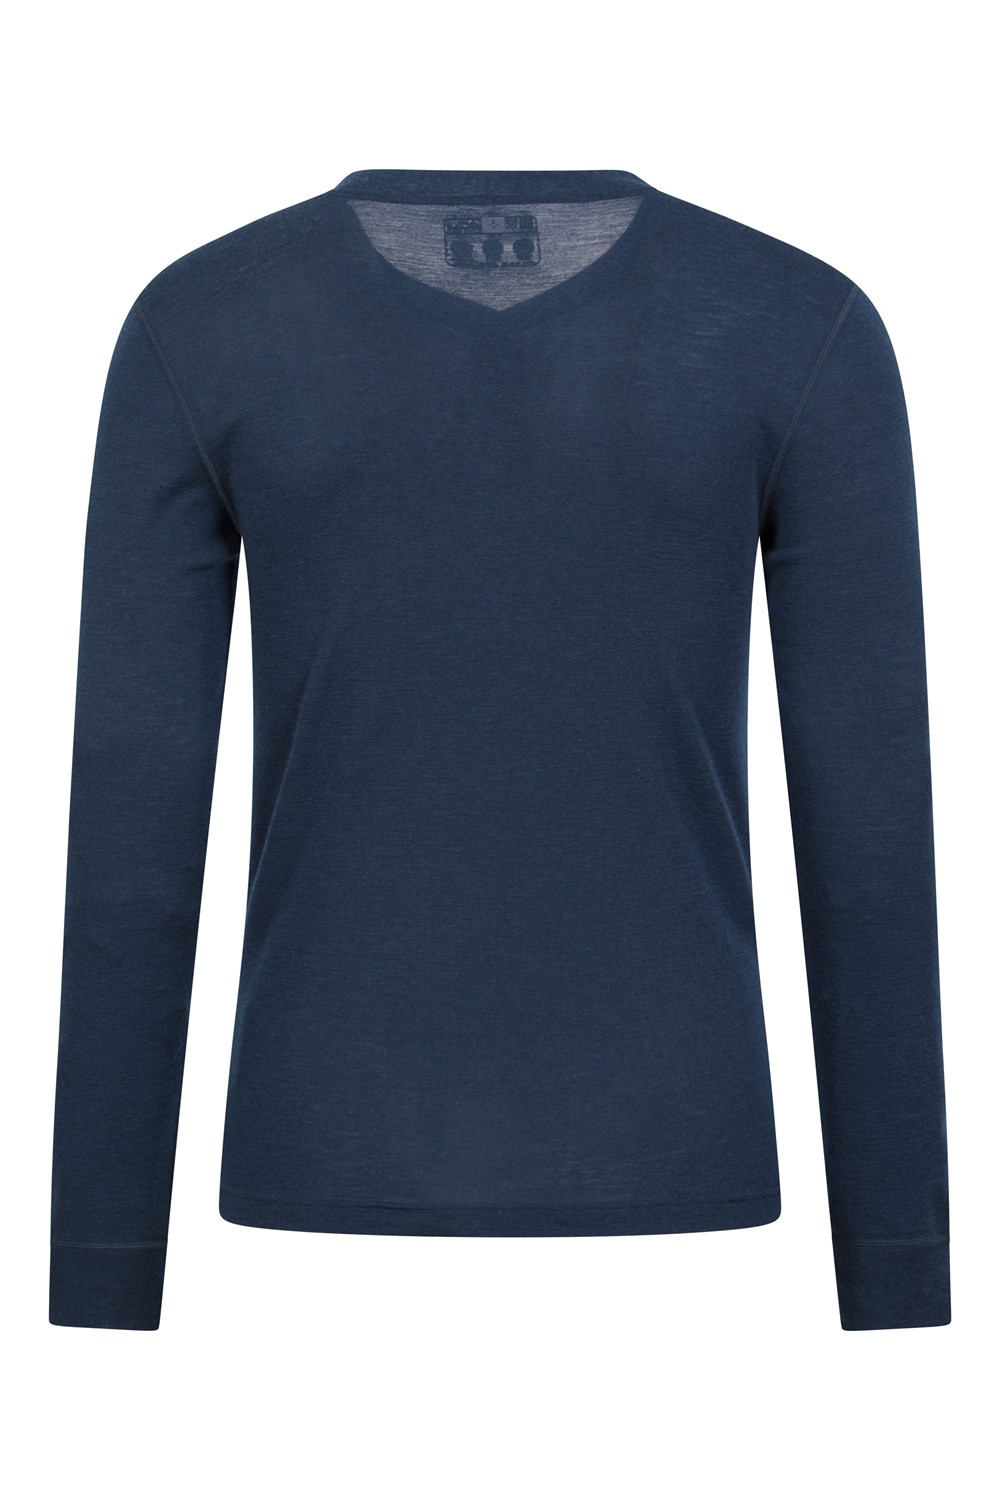 Mountain Warehouse Mens Long Sleeved Round Neck Top Thermal Baselayer  Breathable